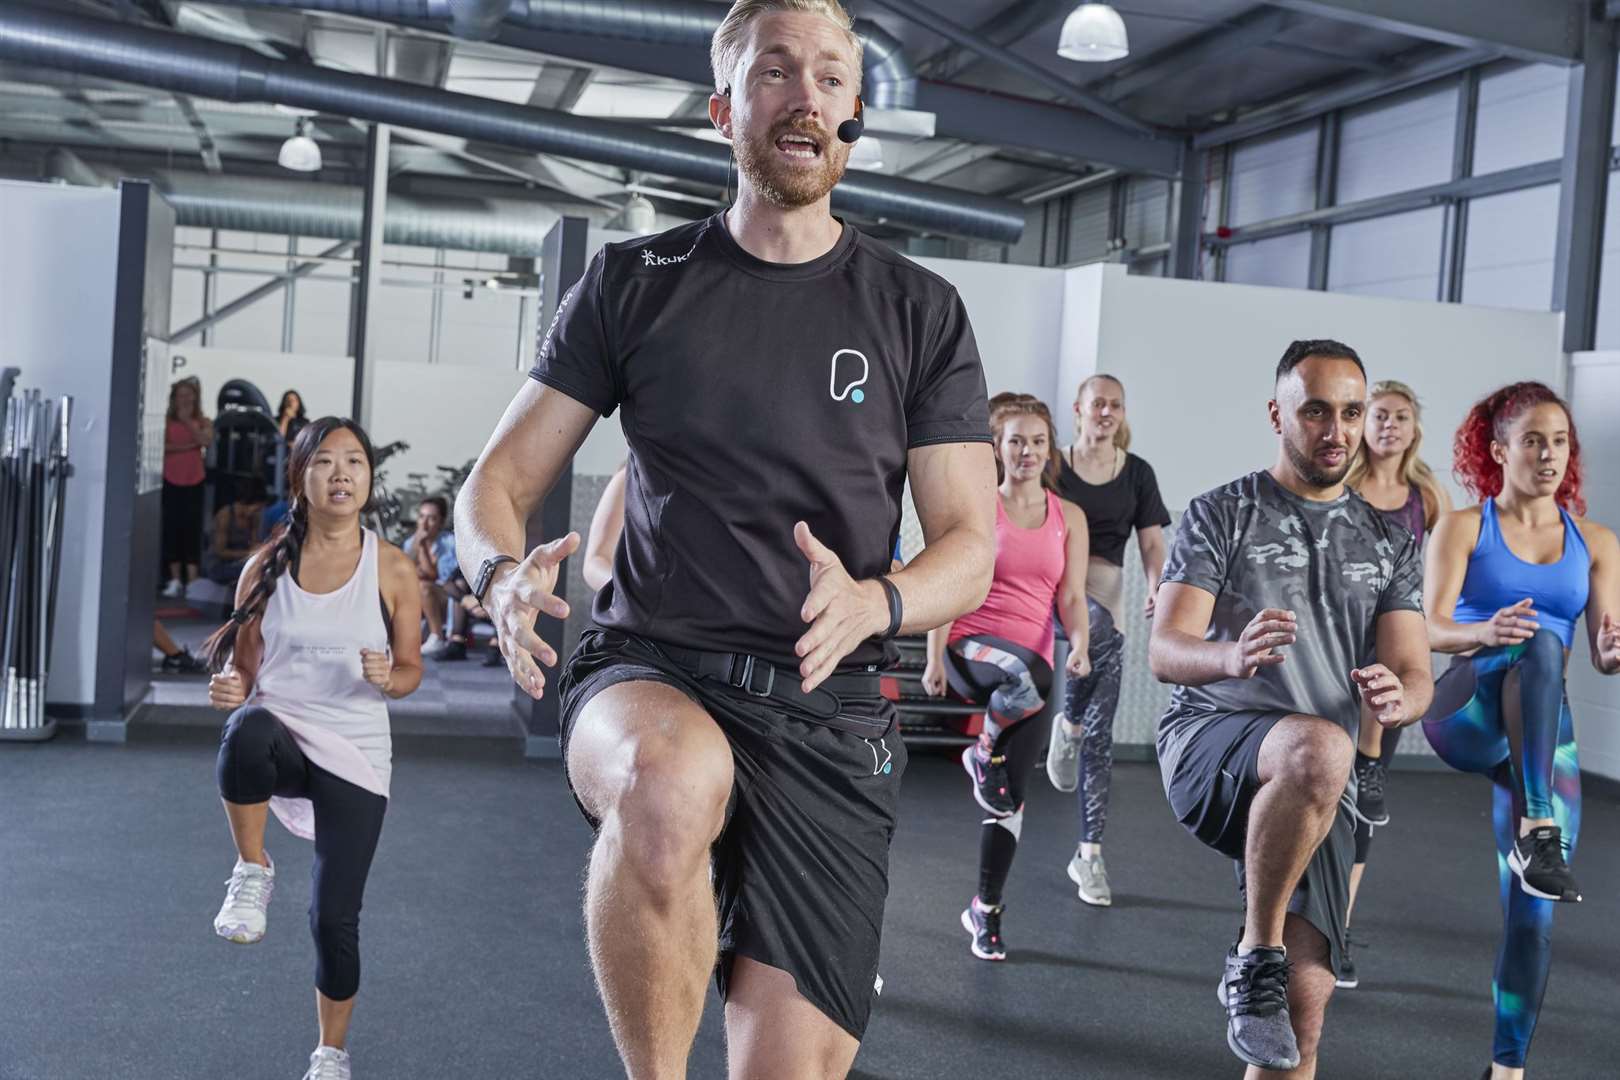 PureGym is set to open its seventh Kent branch in an Ashford former stationery shop